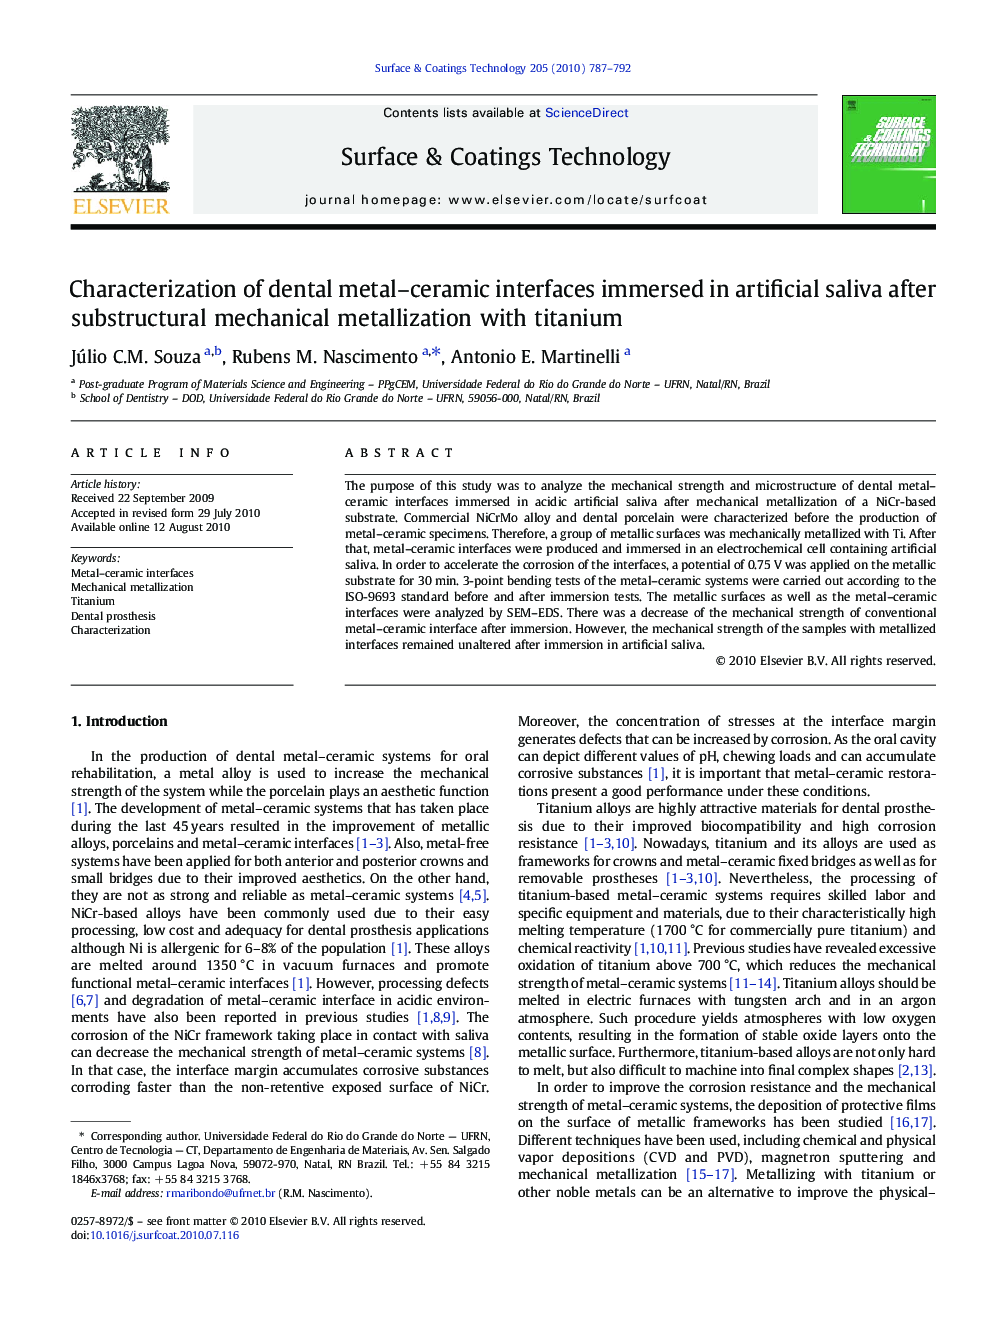 Characterization of dental metal–ceramic interfaces immersed in artificial saliva after substructural mechanical metallization with titanium